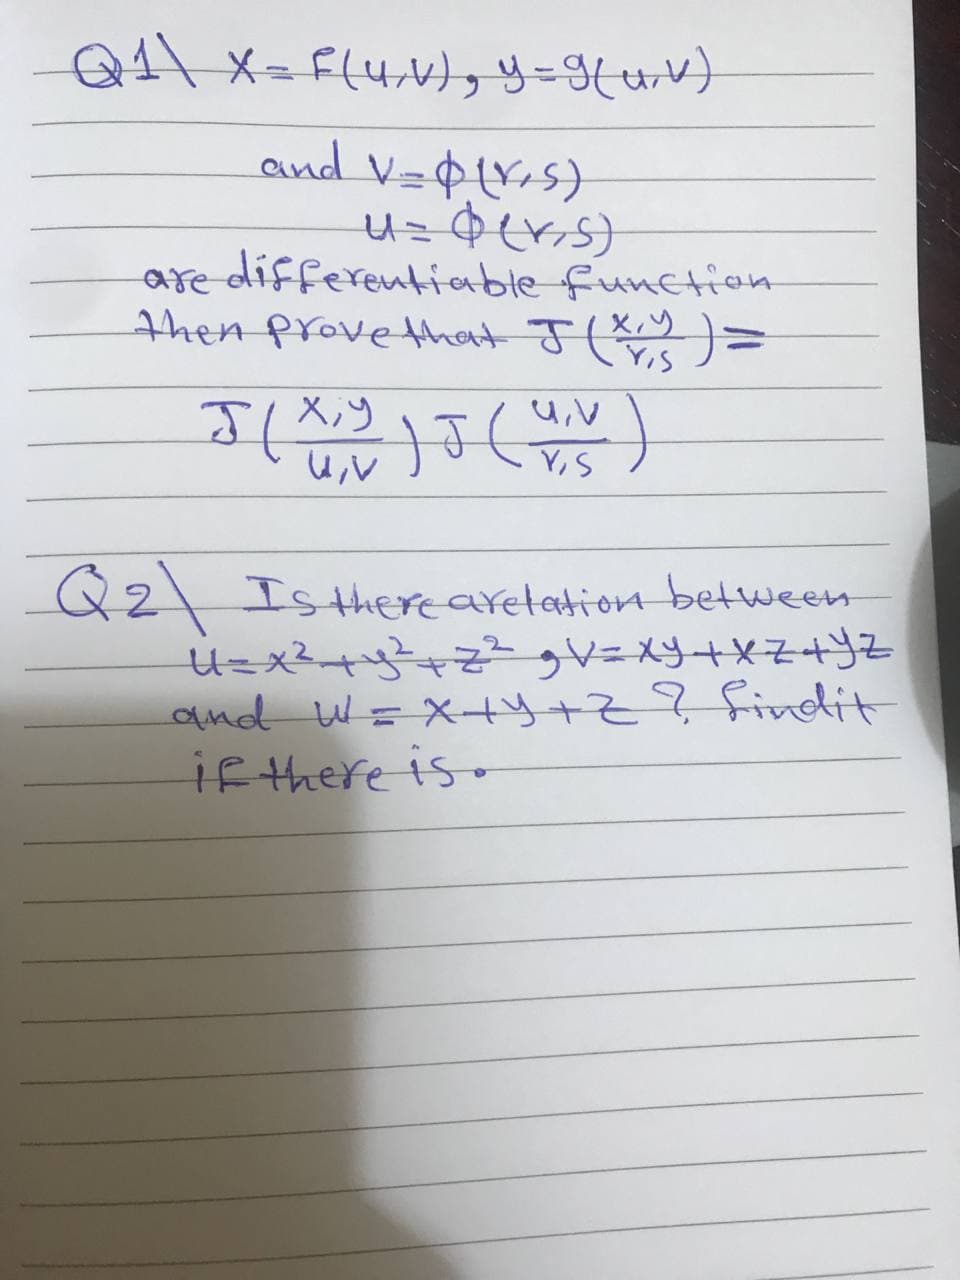 Q1\ x= f(u/v), y = g(u, v)
and V=$(V+S)
u= $(₂5)
are differentiable function.
then prove that J (Xry ) =
J(X,Y) J (W/V)
Q2 Is there arelation between
U= x² + y² + Z² gV=XY+XZ 4 Y Z
and W = x++y+Z? findit
if there is.